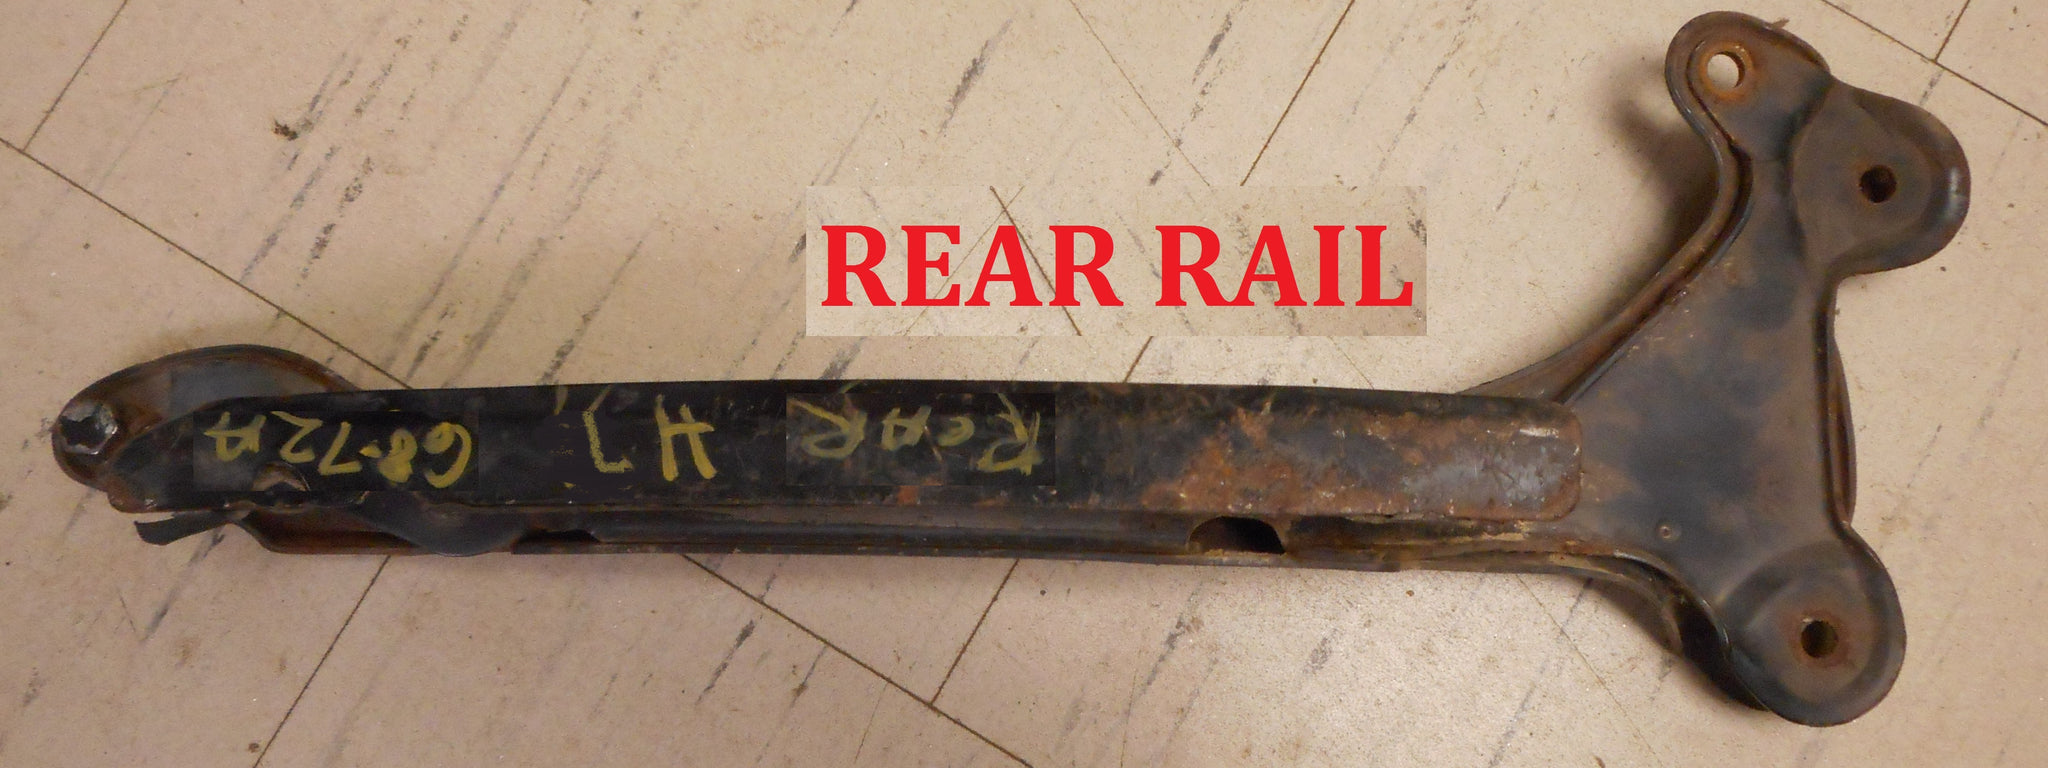 CONVERTIBLE TOP FRAME RAIL ,LEFT REAR ,USED 68-72 A-BODY